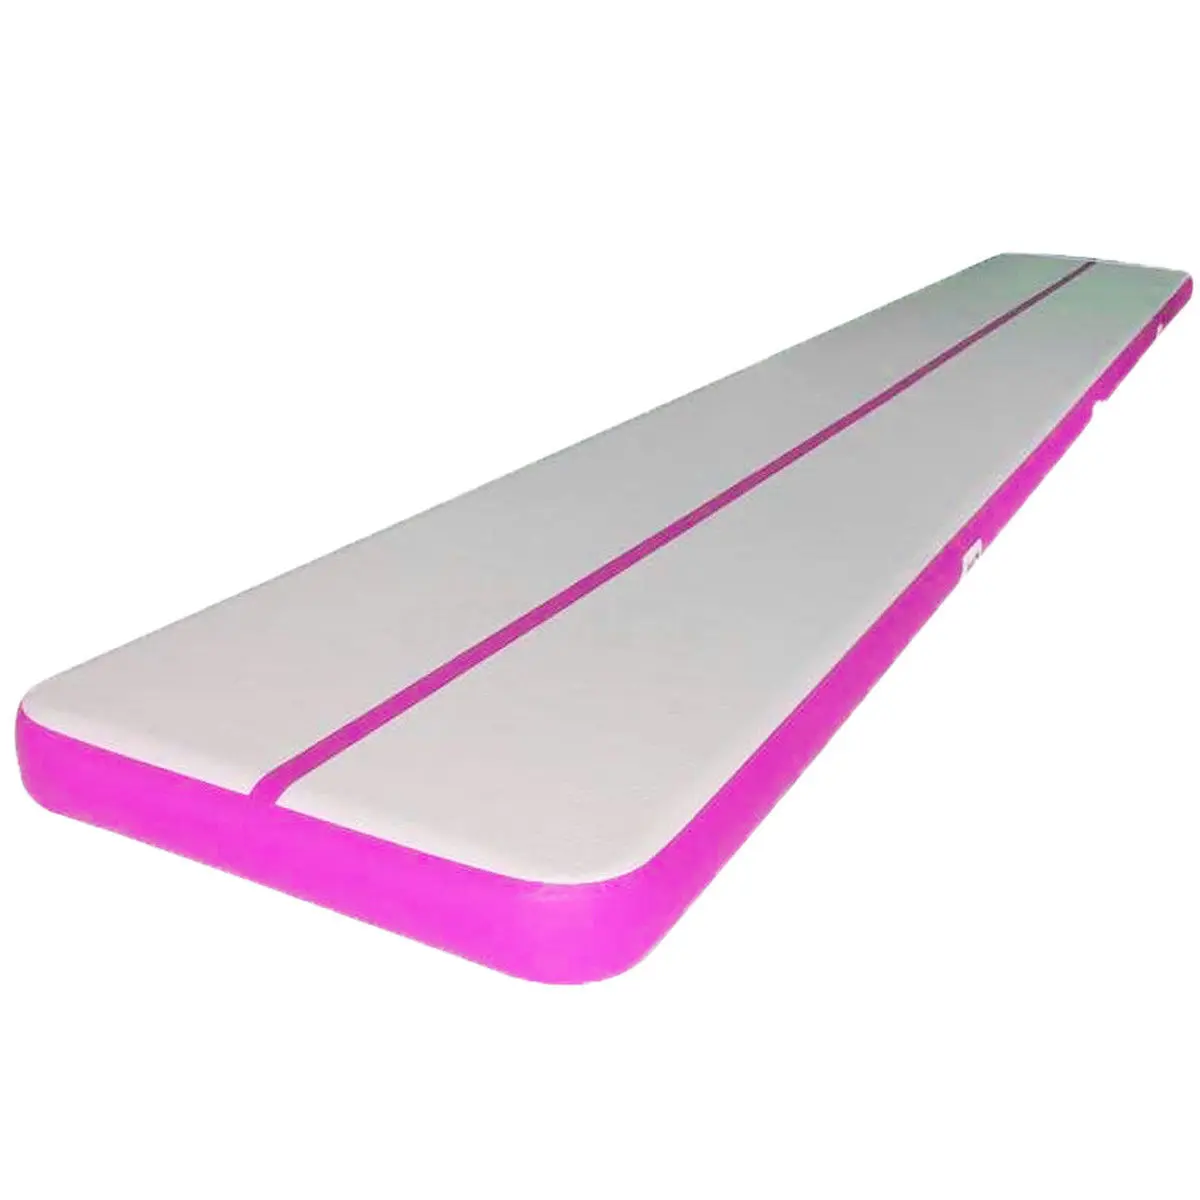 

Hot Sell High Quality Inflatable Air Track Gymnastic Tumbling/Yoga Mat For Sale, Multi-color